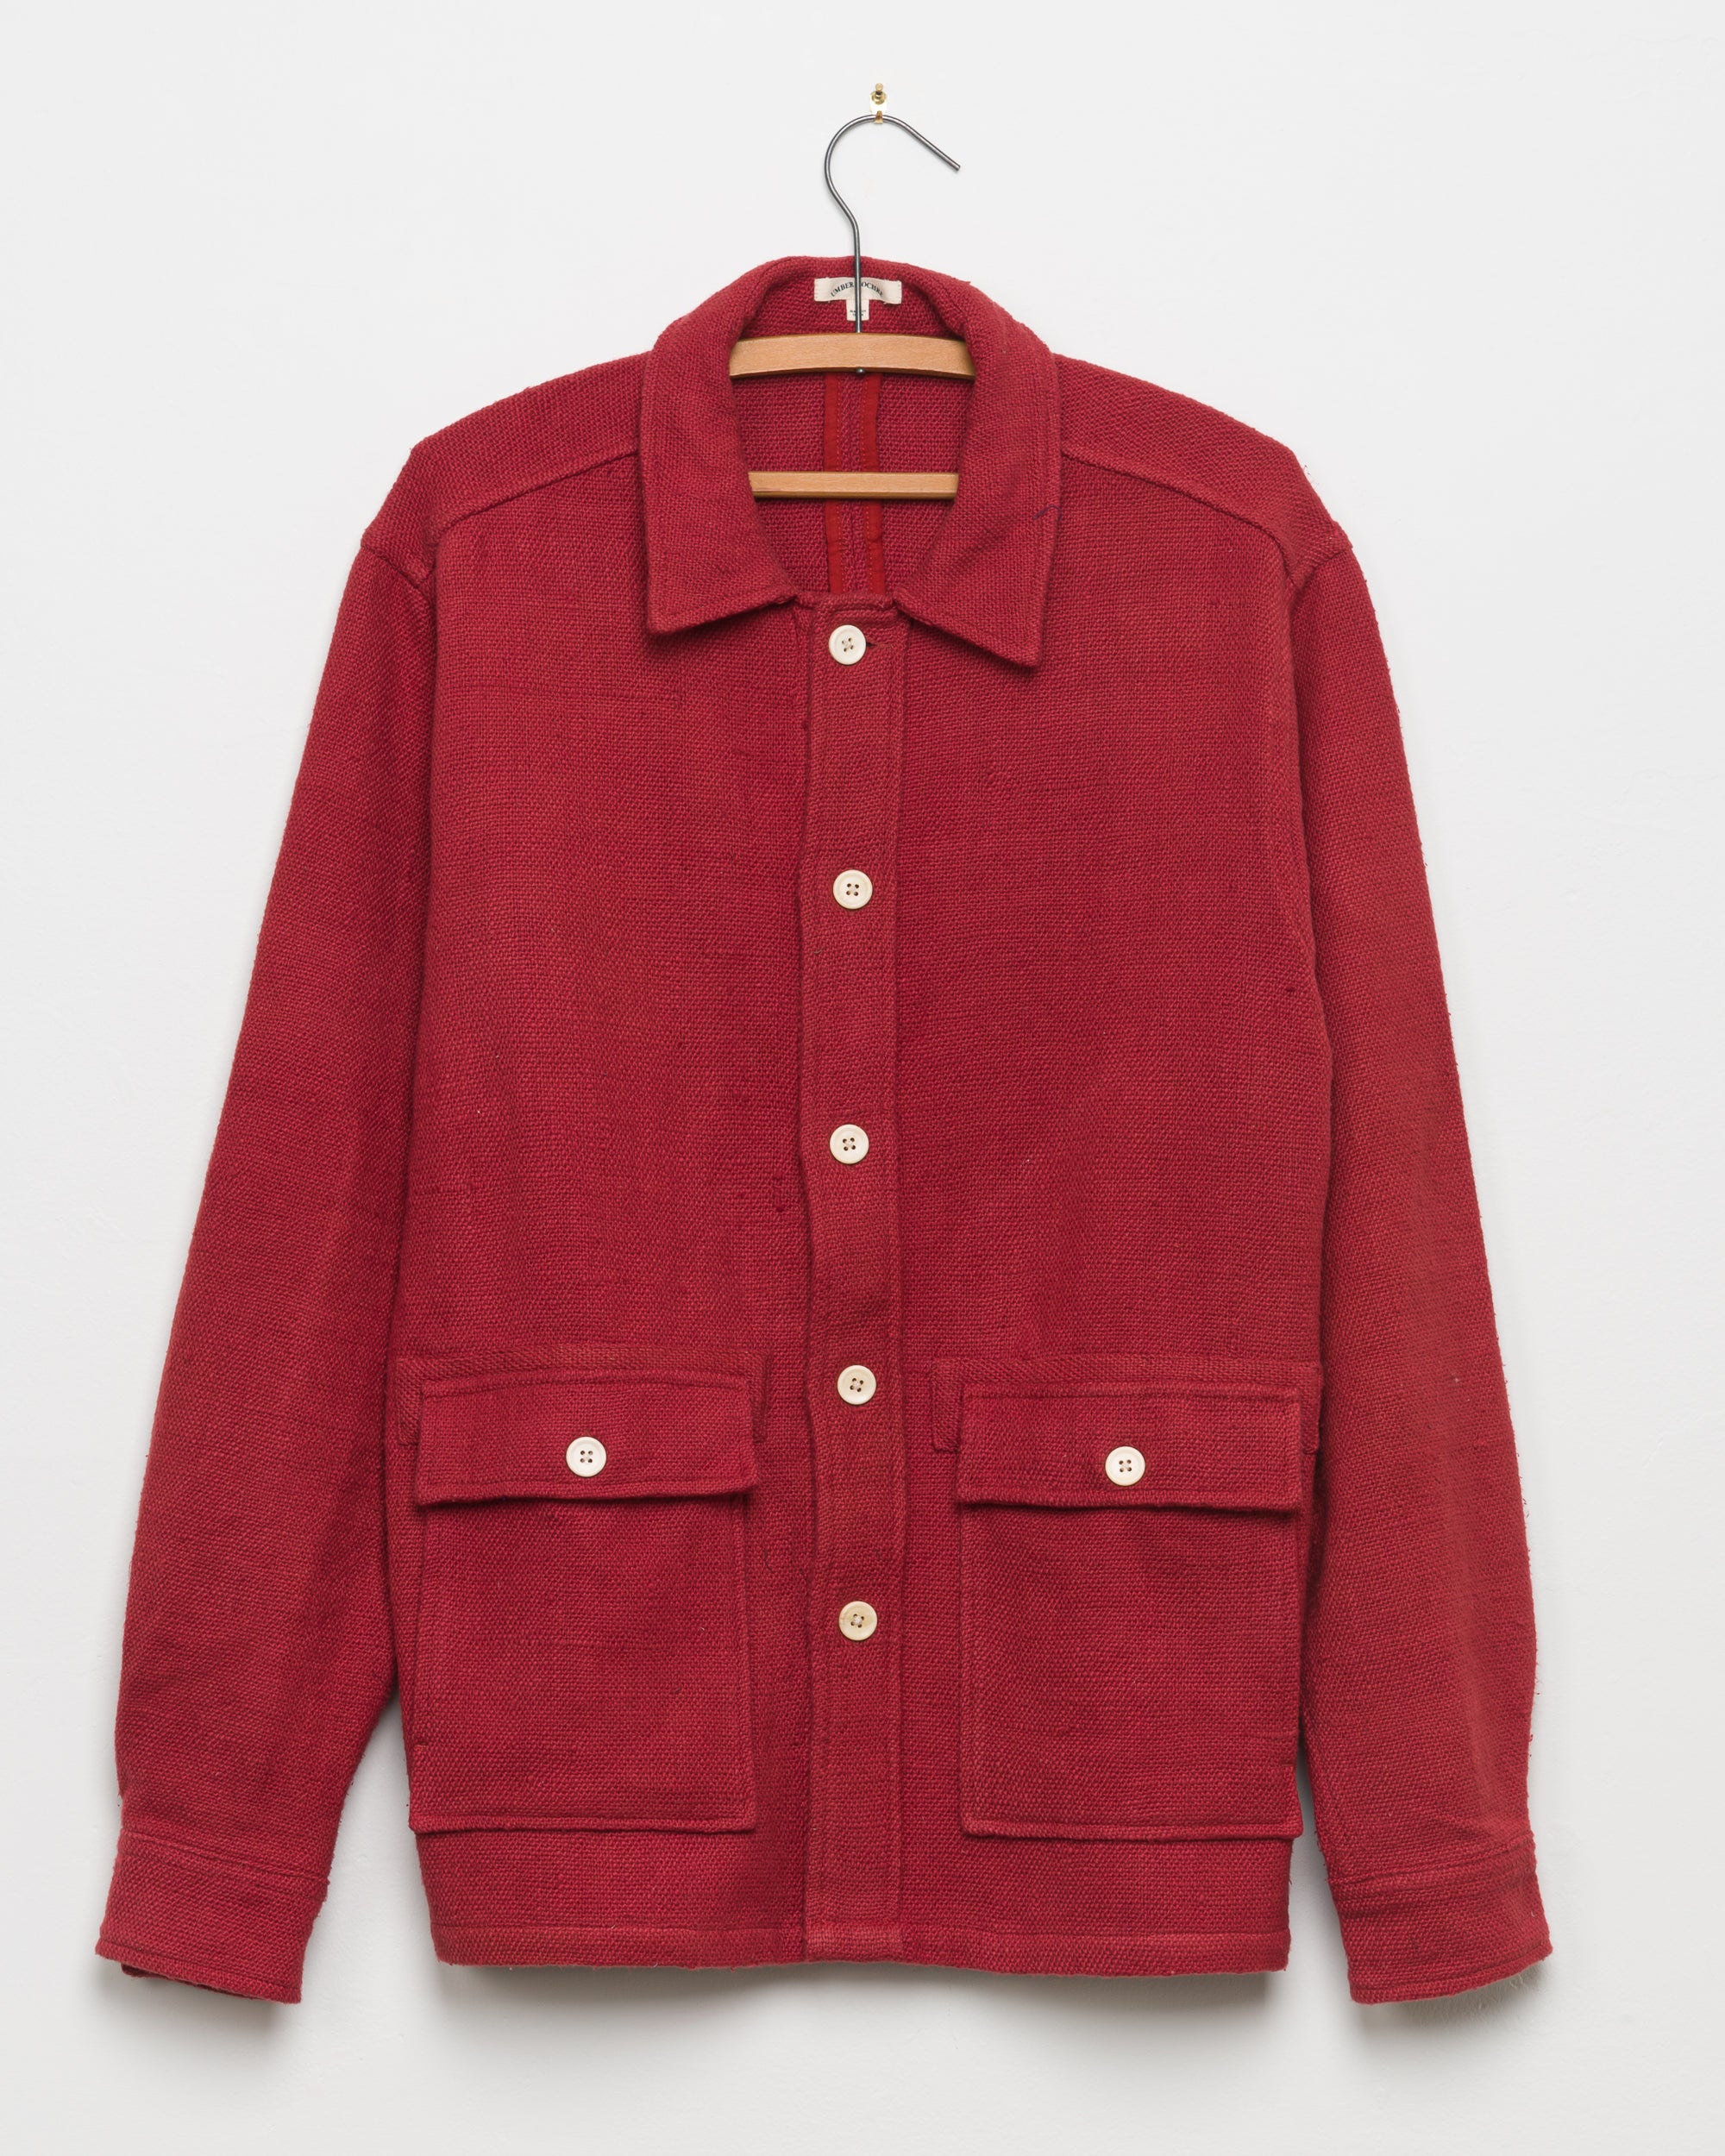 Chore Coat in Red Nubby Cotton